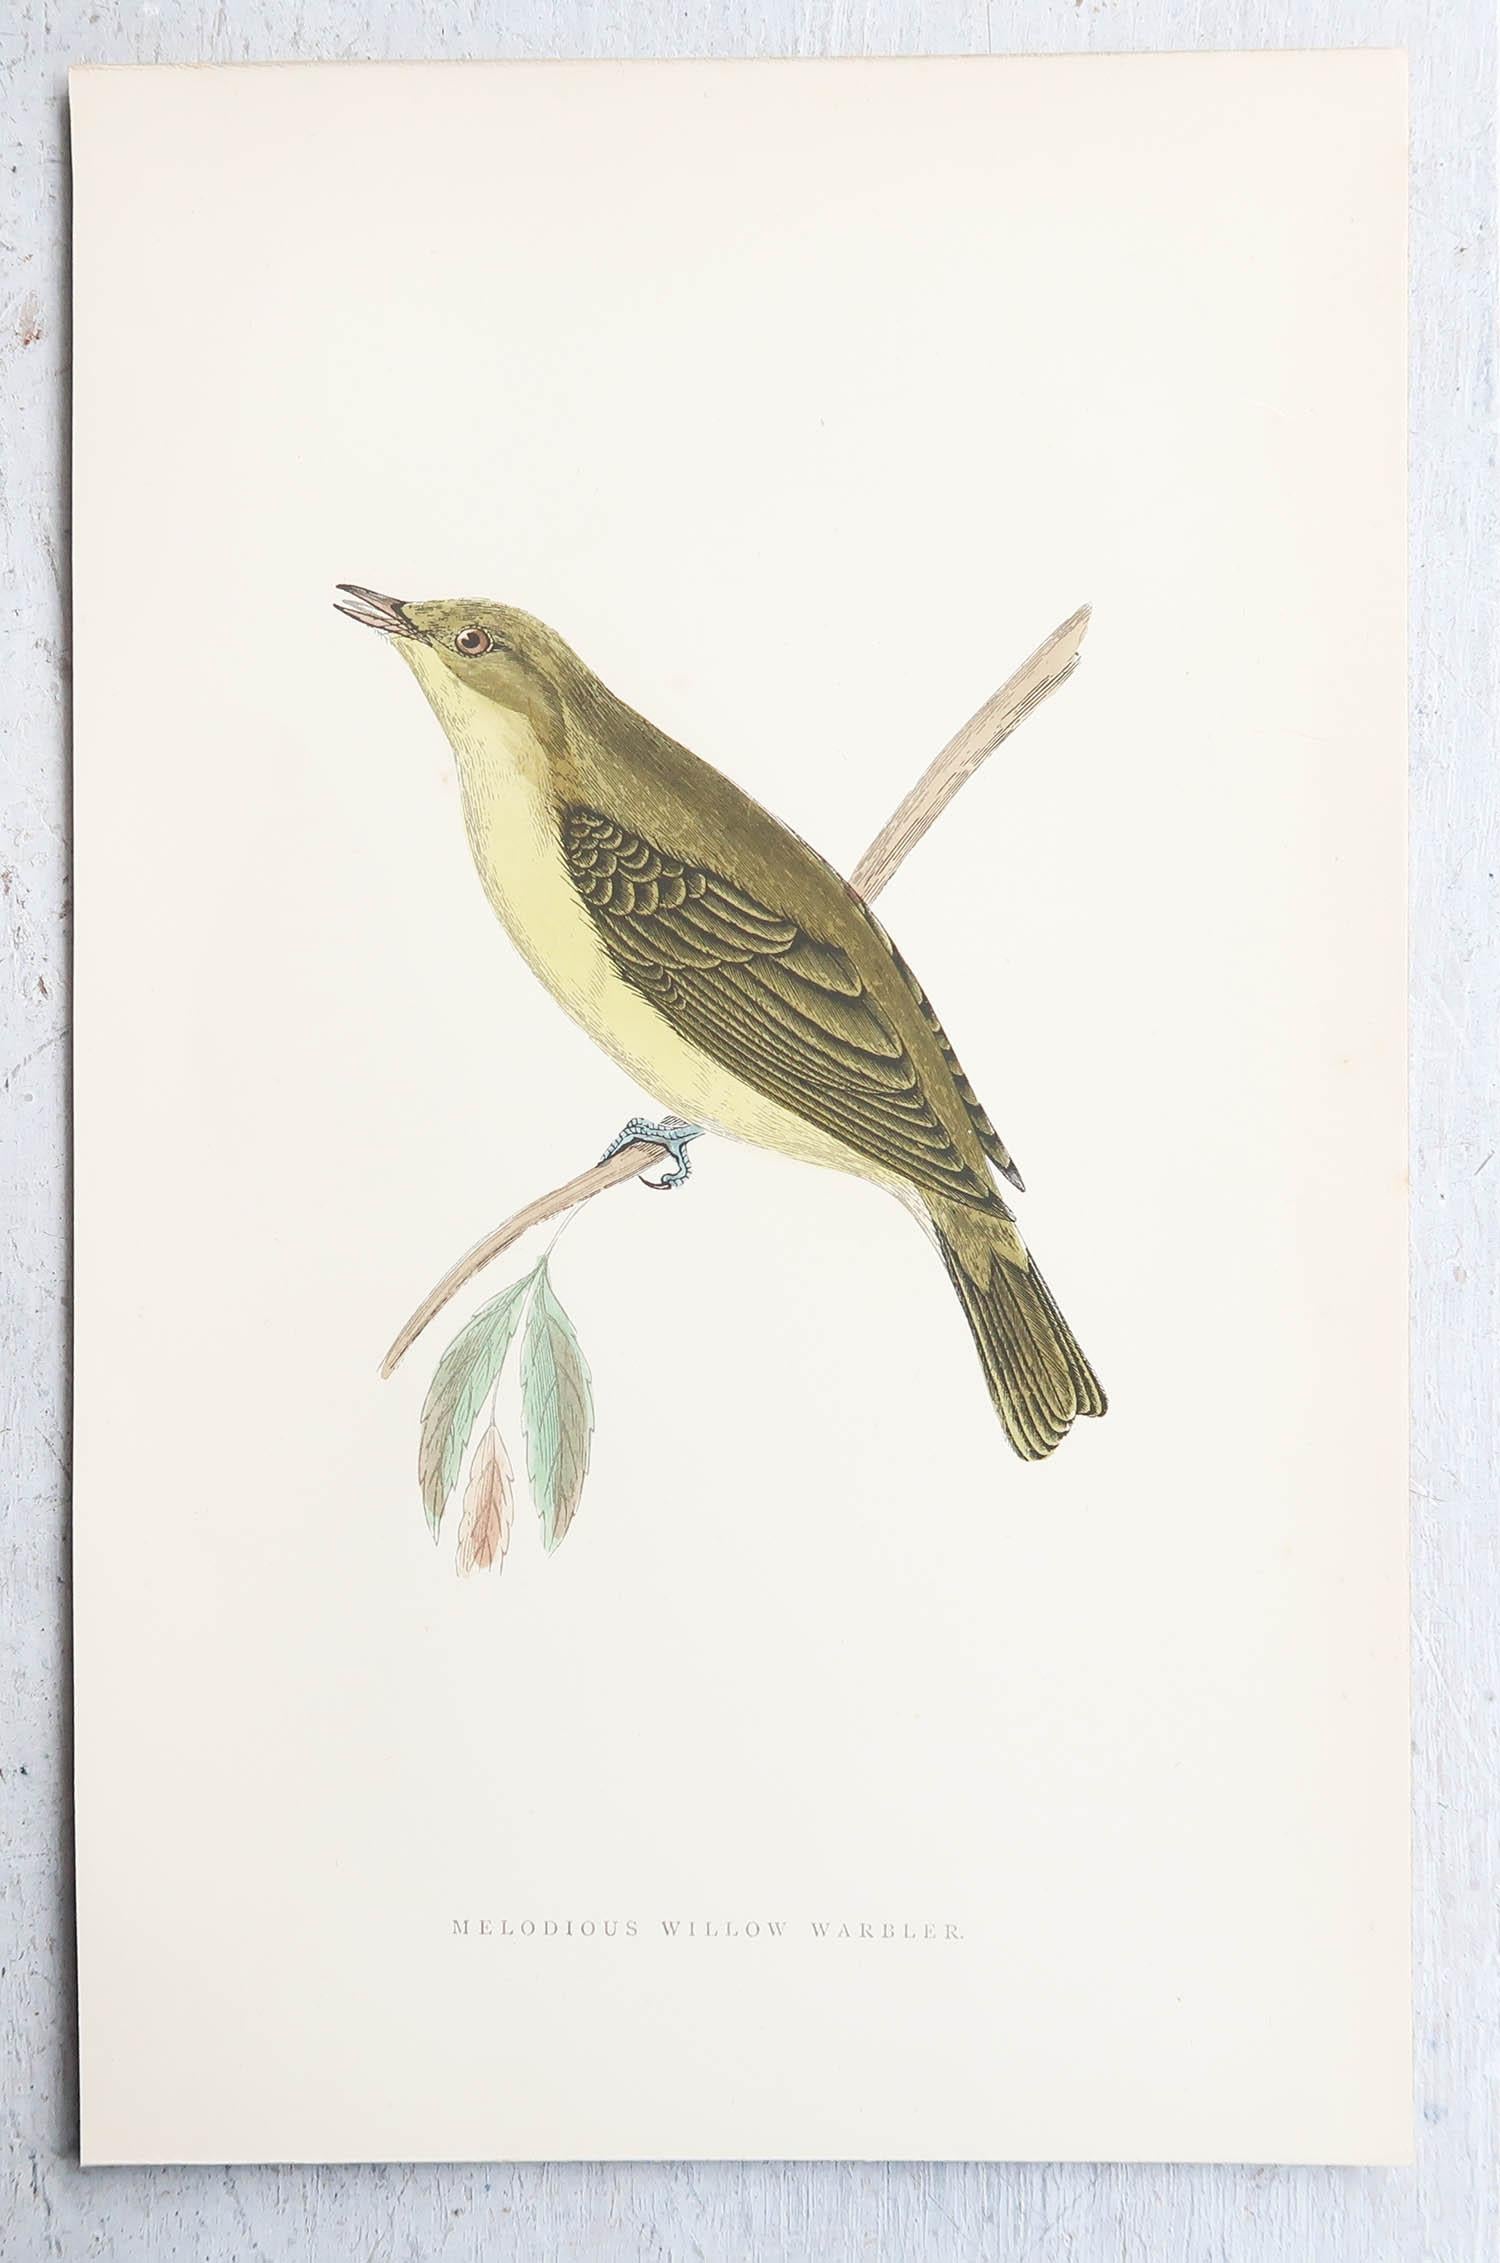 English Original Antique Print of a Melodious Willow Warbler, circa 1880, 'Unframed' For Sale